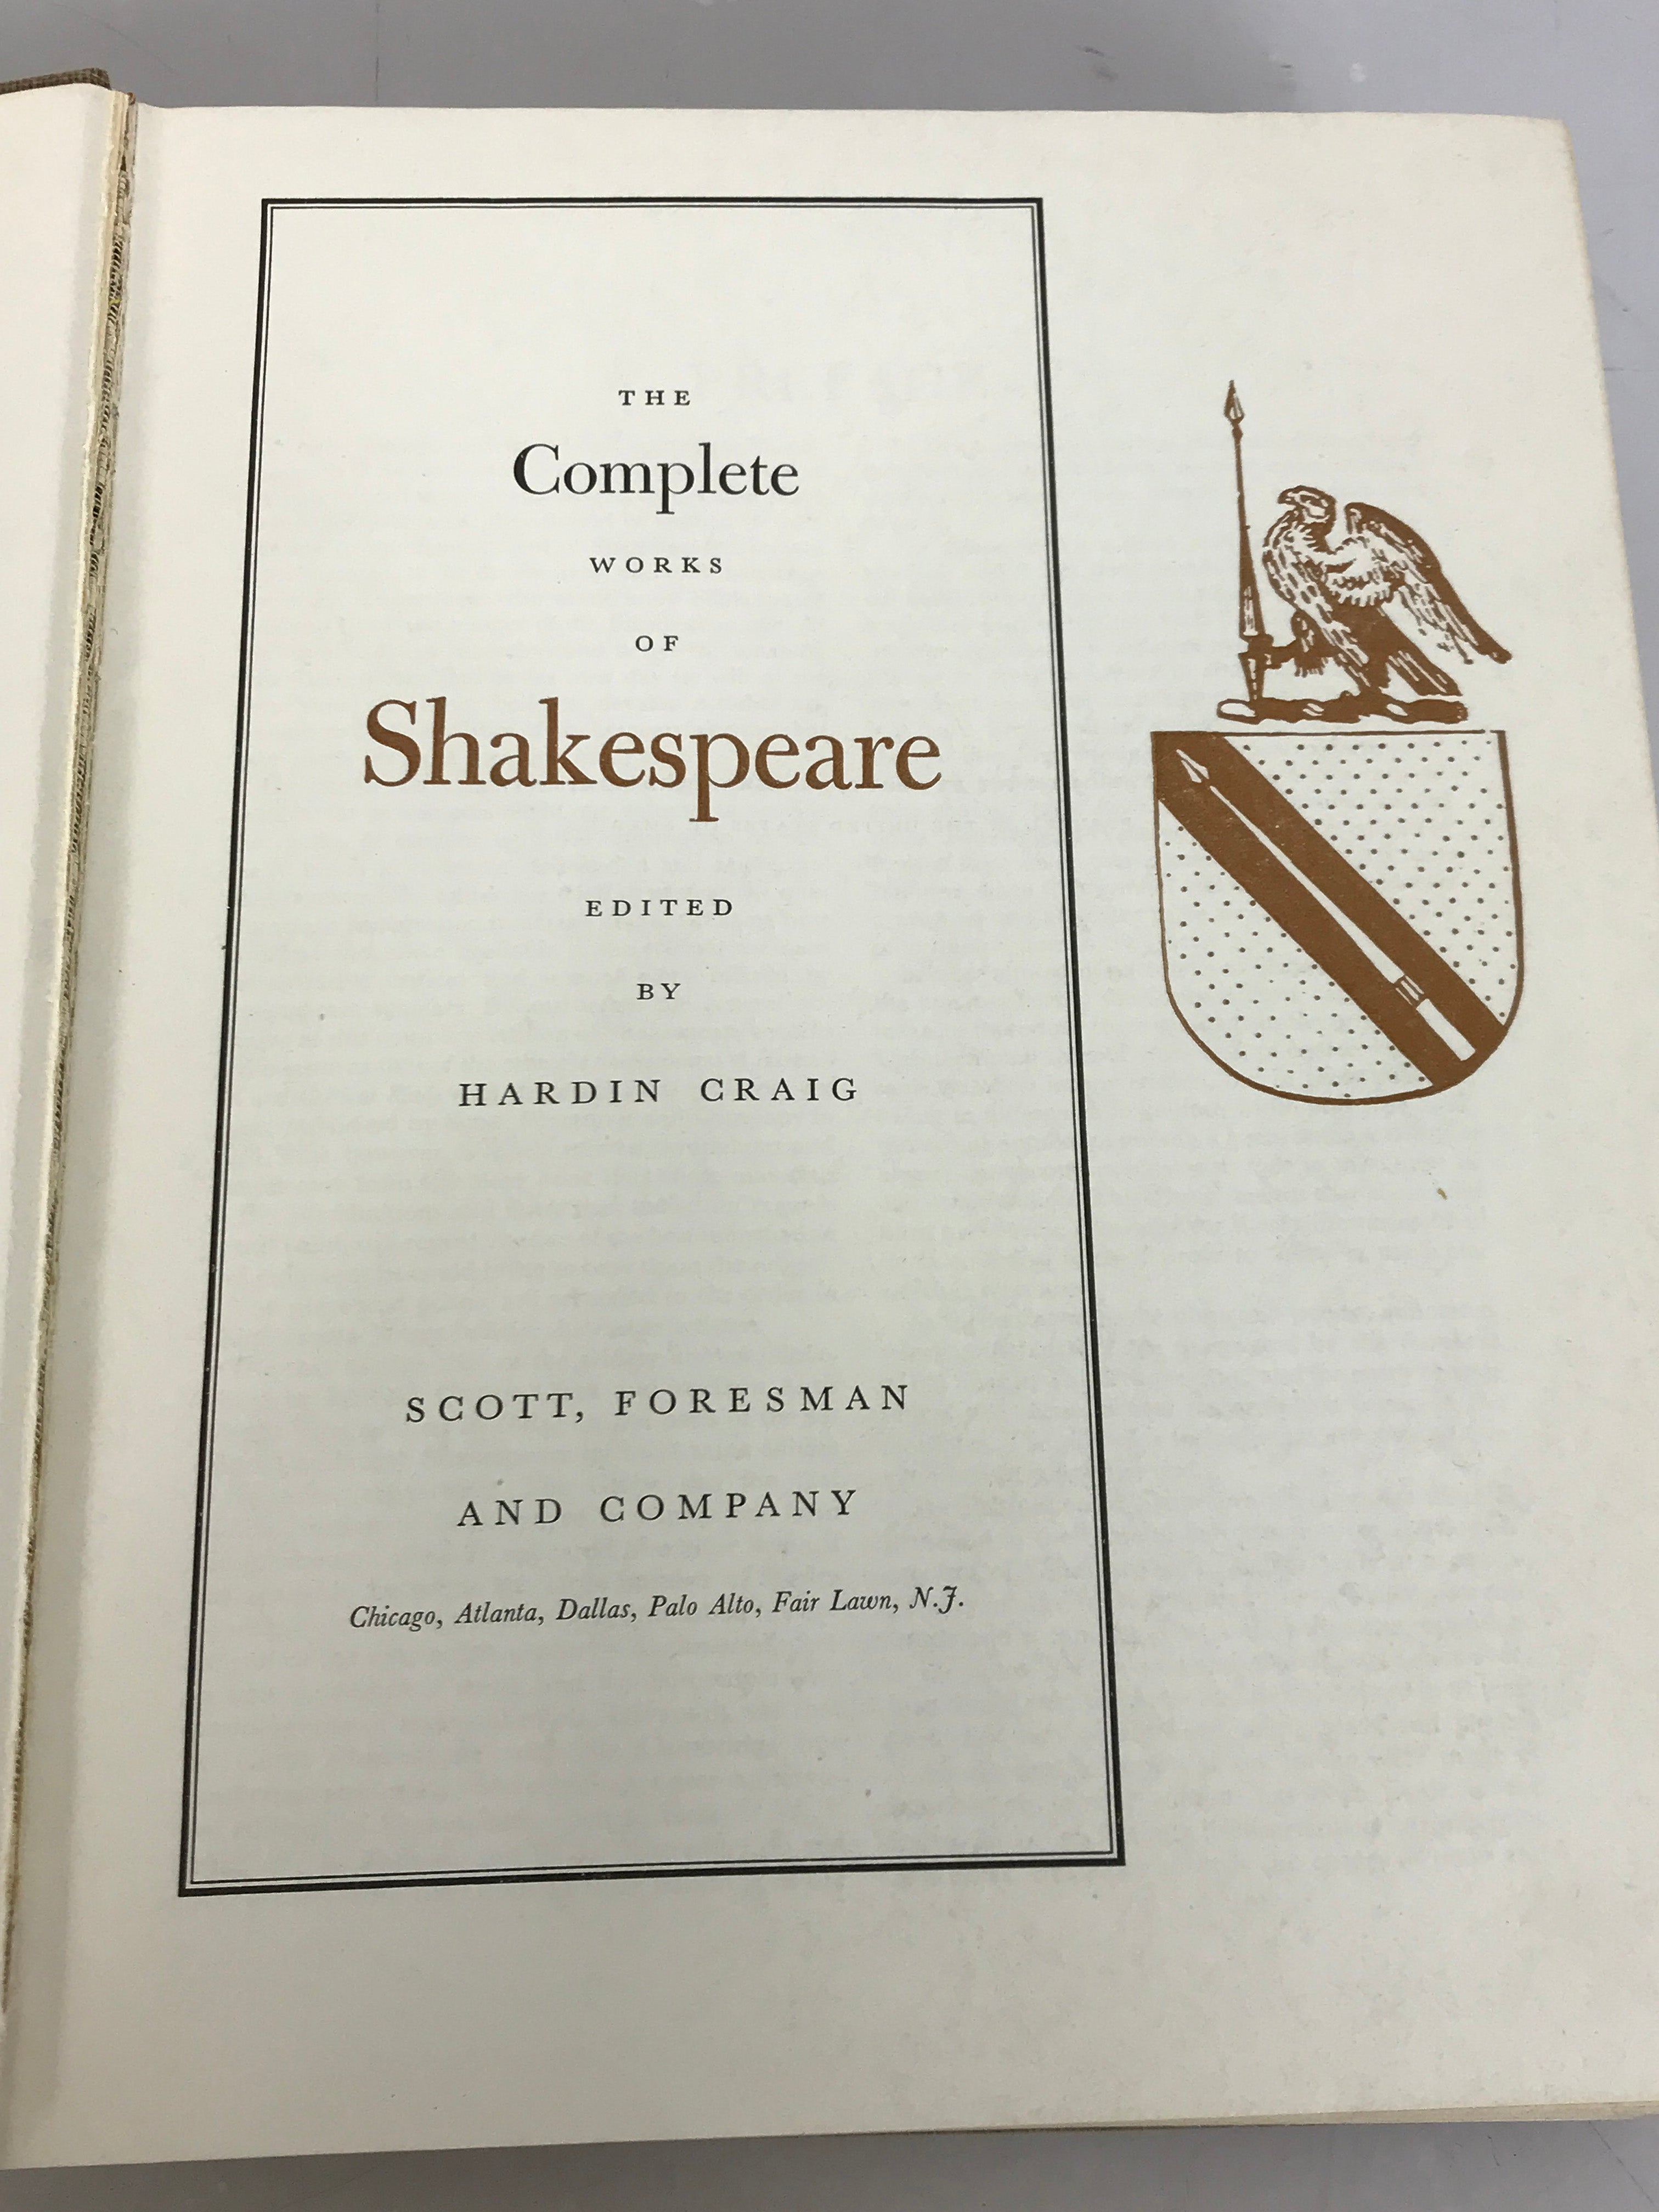 The Complete Works of Shakespeare by Hardin Craig 1951 HC